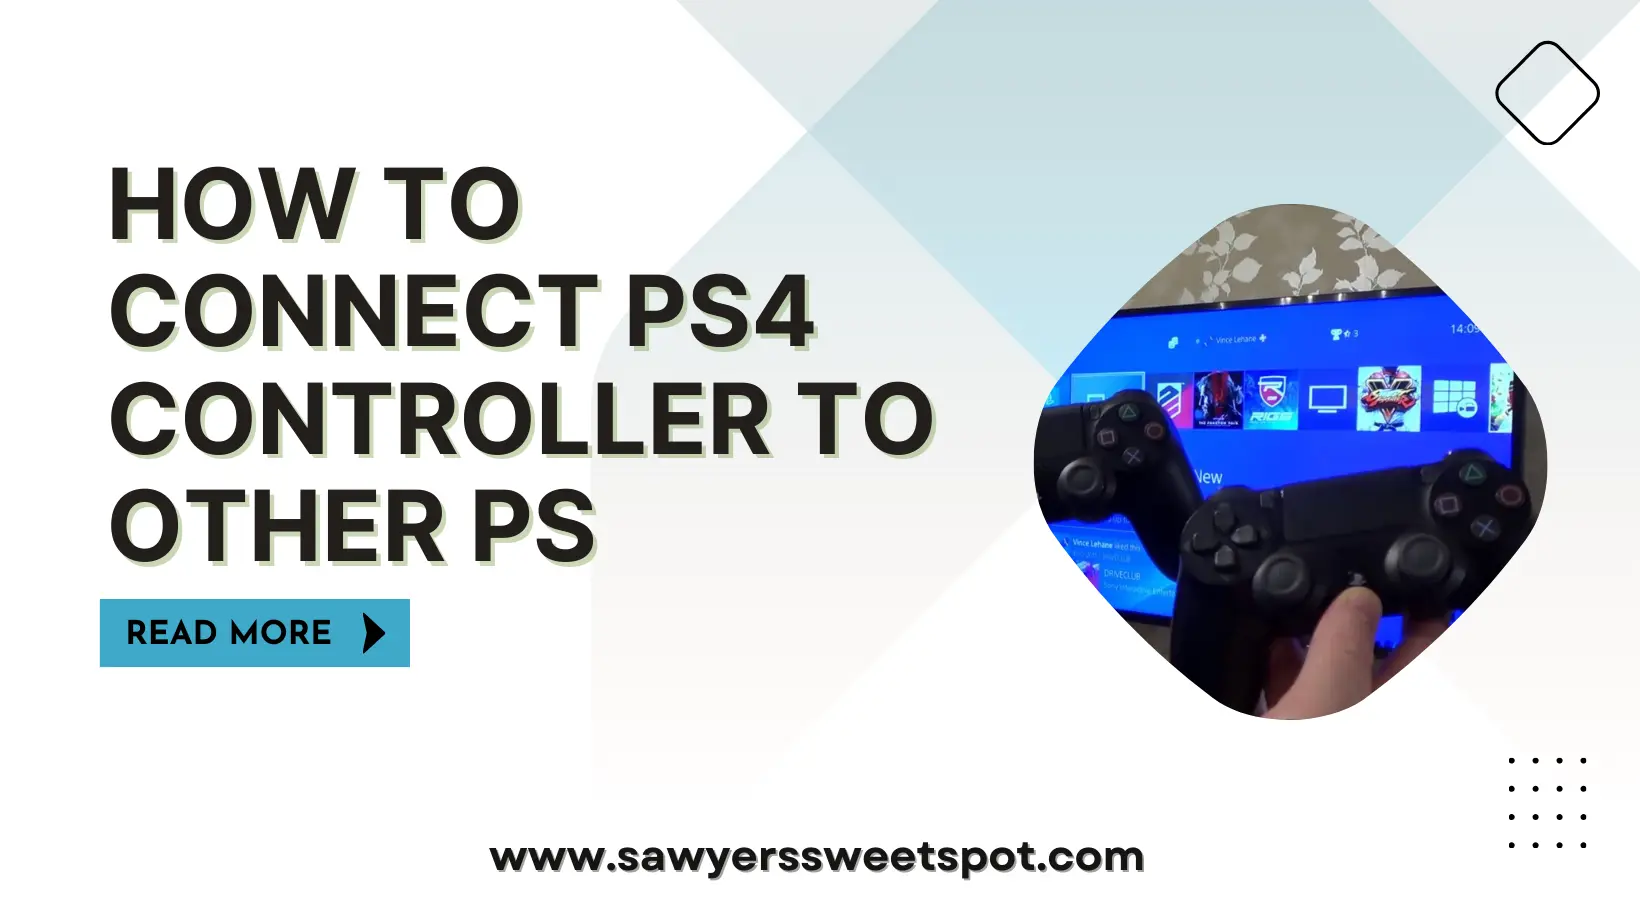 How to Connect PS4 Controller to Other PS Without USB?